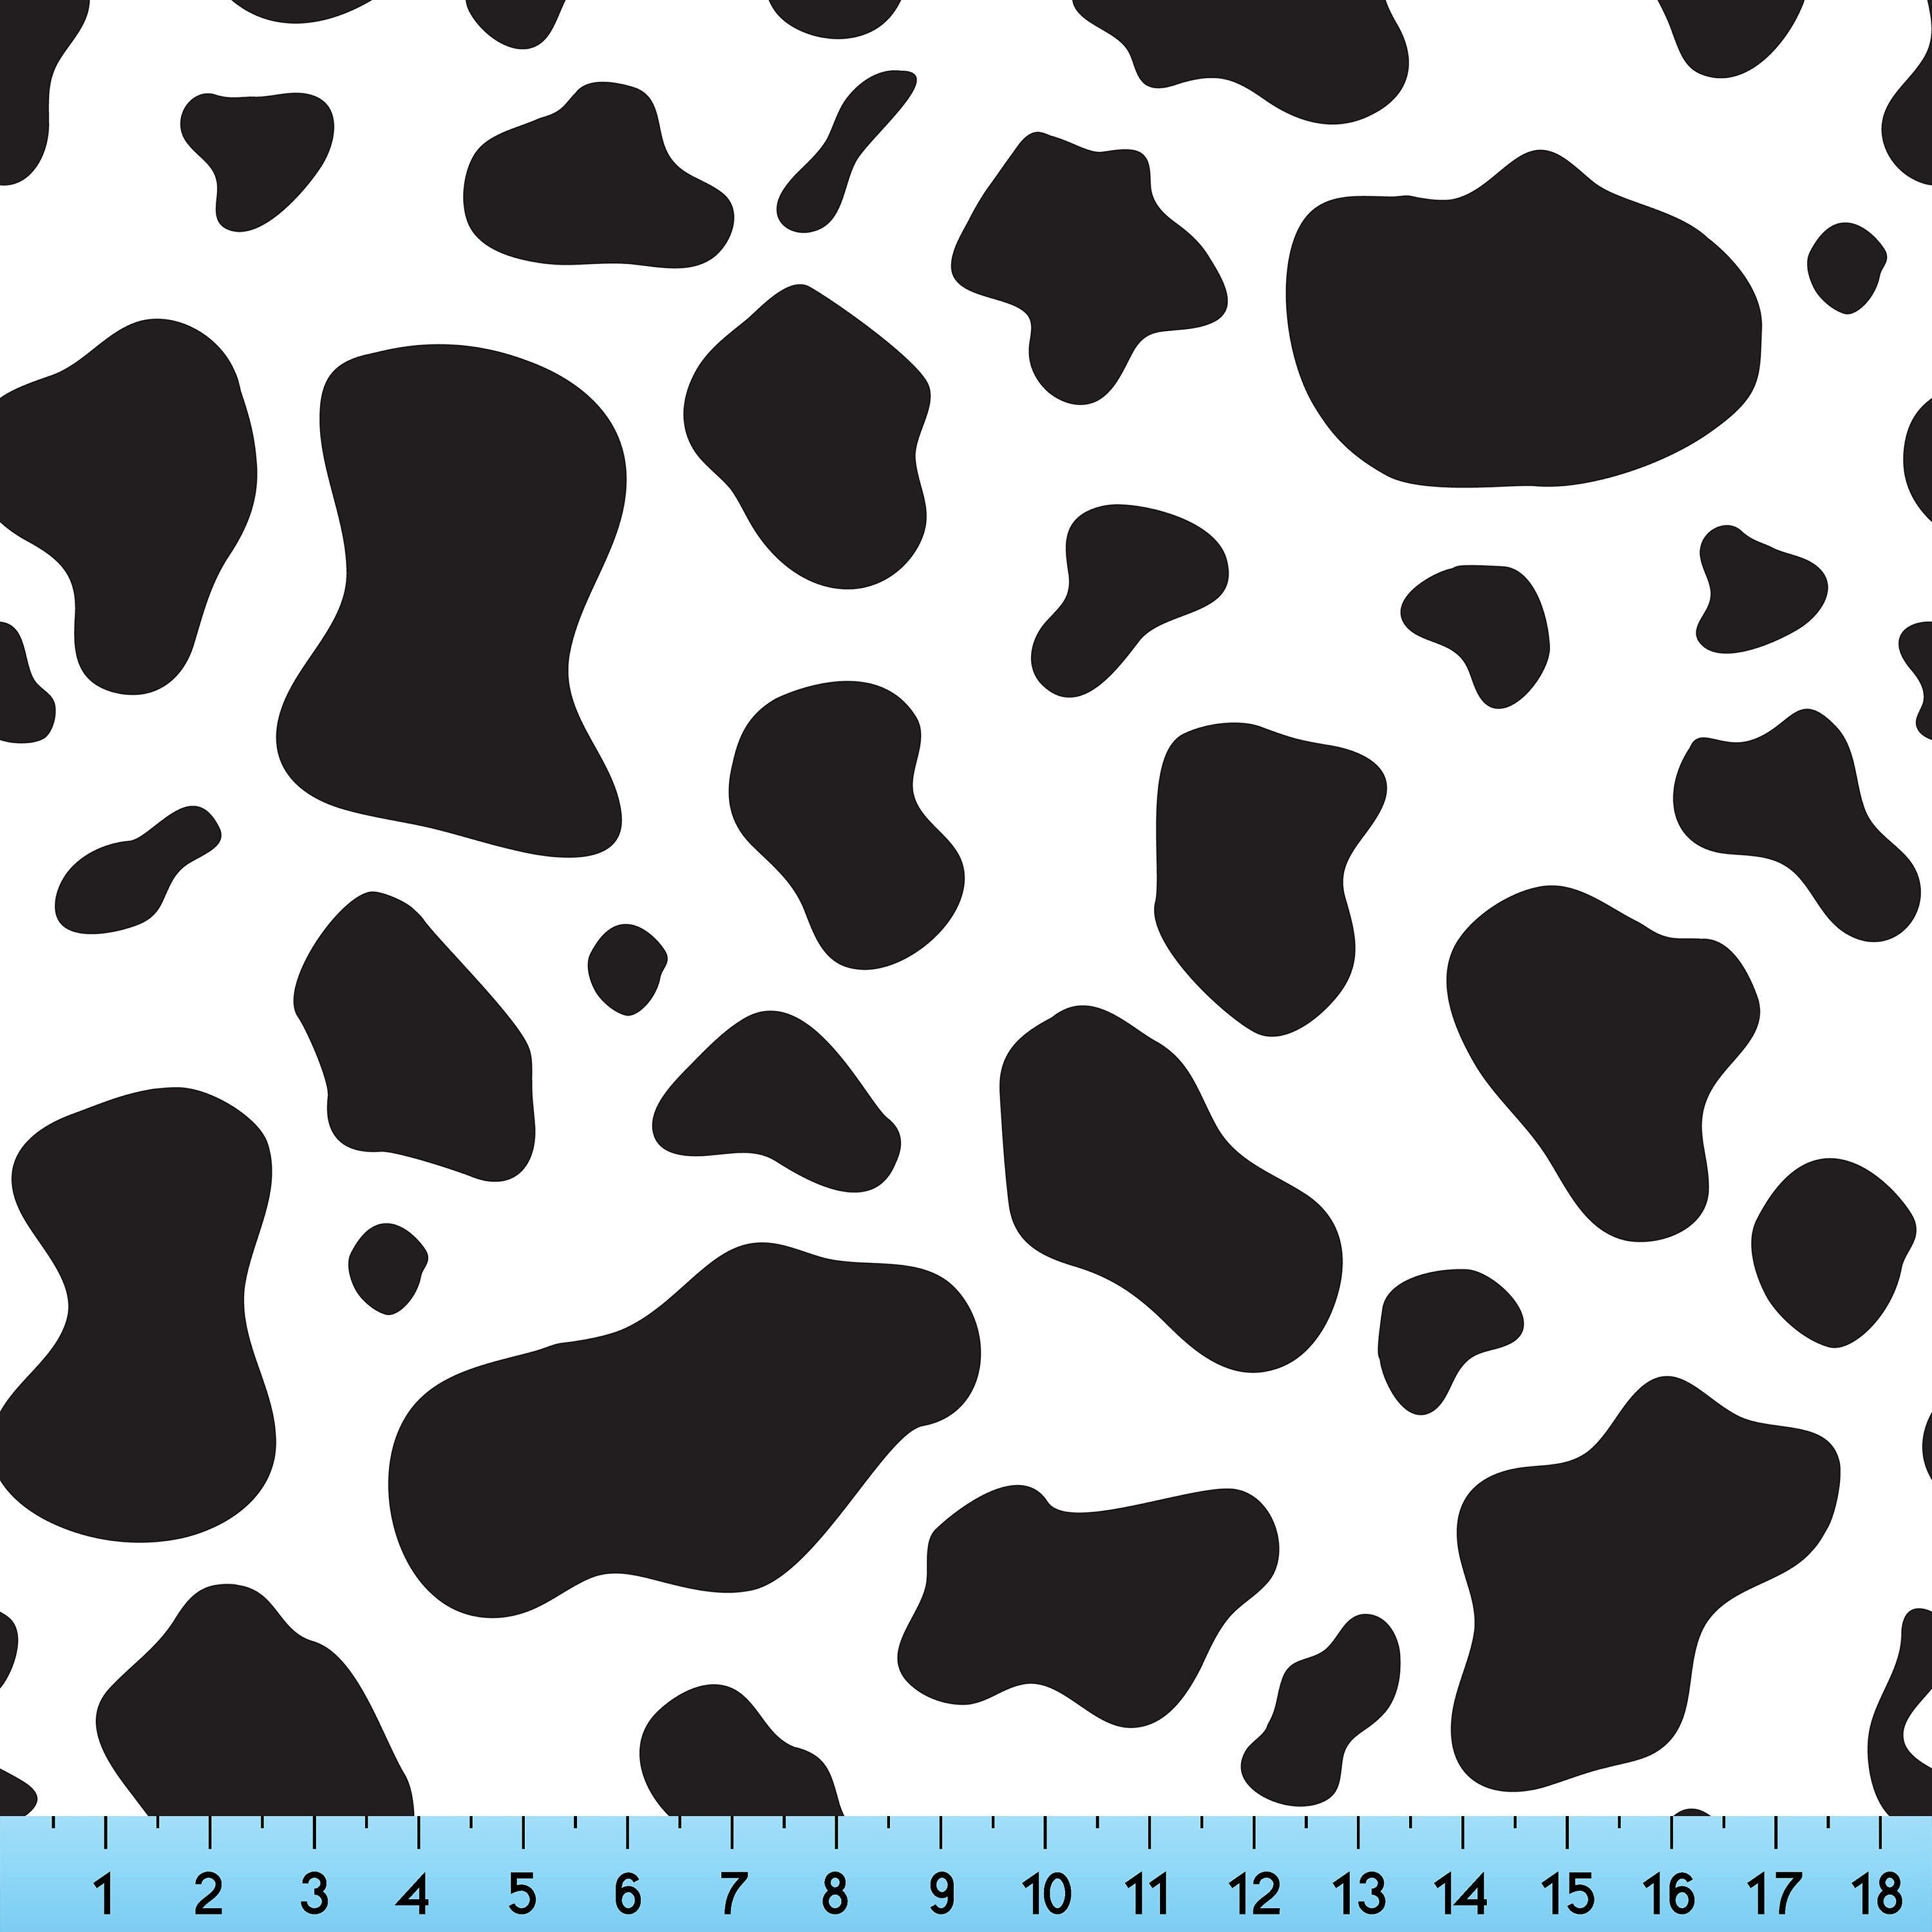  Manfei Cow Print Fabric by The Yard, Brown White Cow Fur Print  Fabric for Craft Lovers and Sewing Hobby, Abstract Cowhide Print Decorative  Fabric for for Upholstery and Home DIY Projects